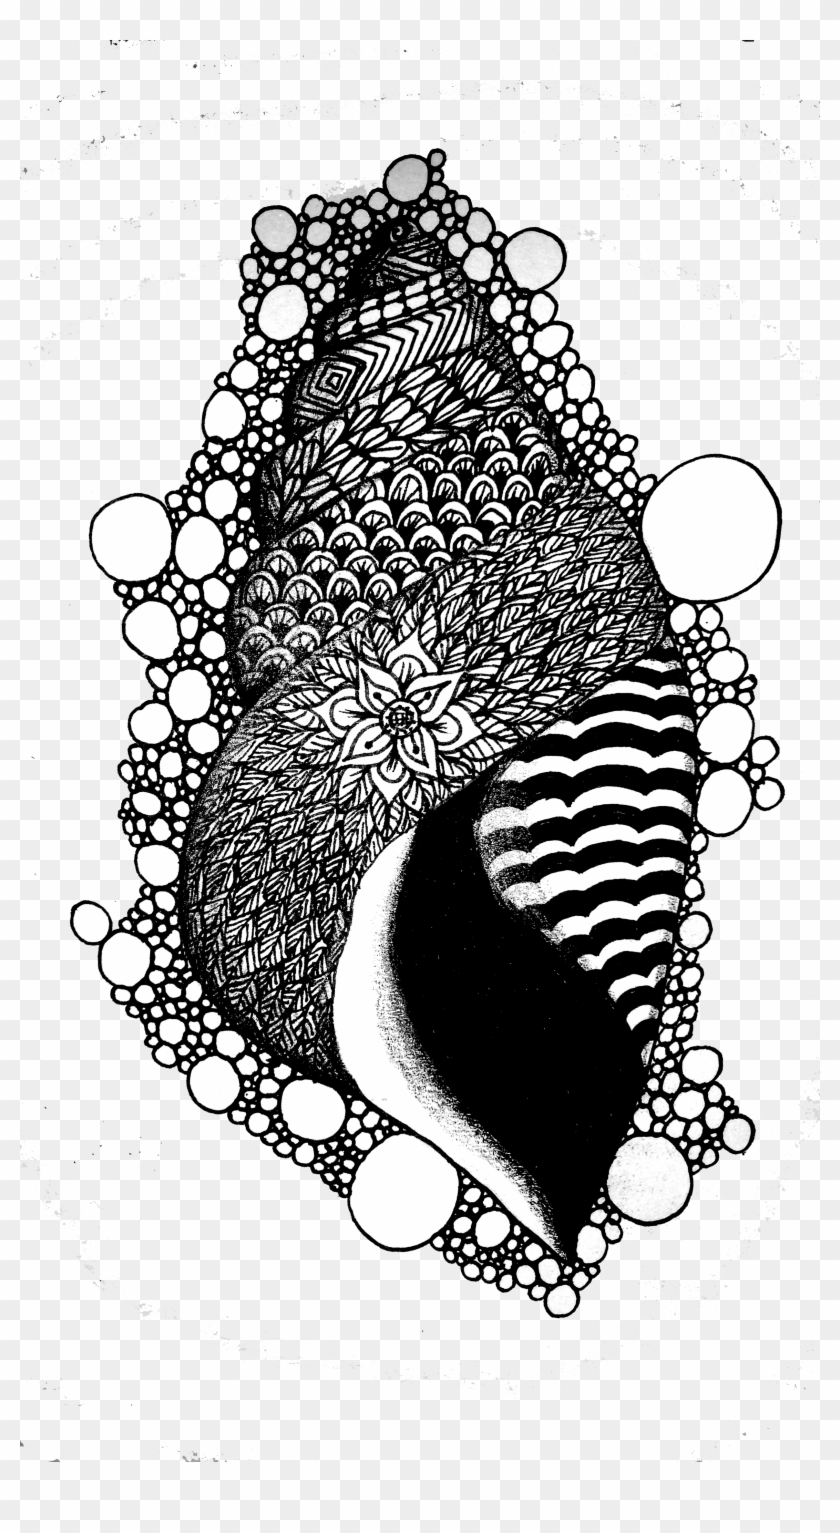 Drawn Tentacle Zentangle - Illustration Clipart #3734593